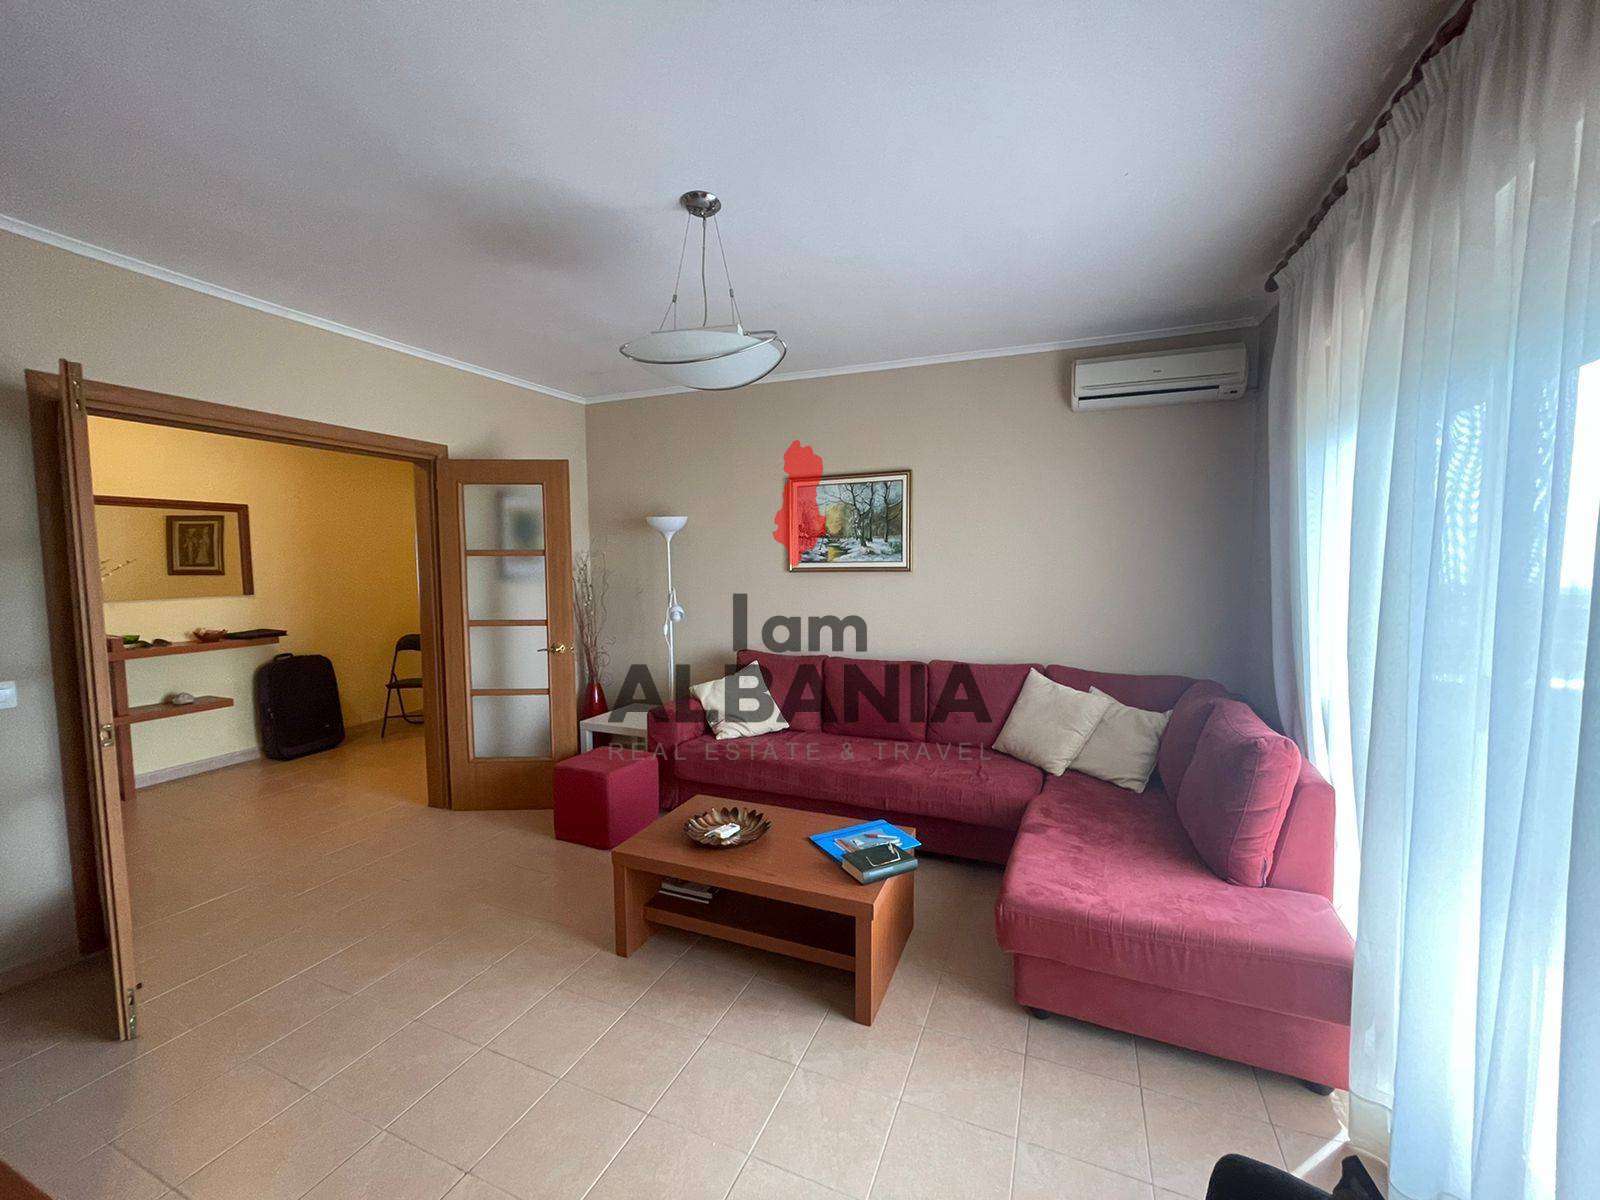 Albania, 3-room apartment as an investment